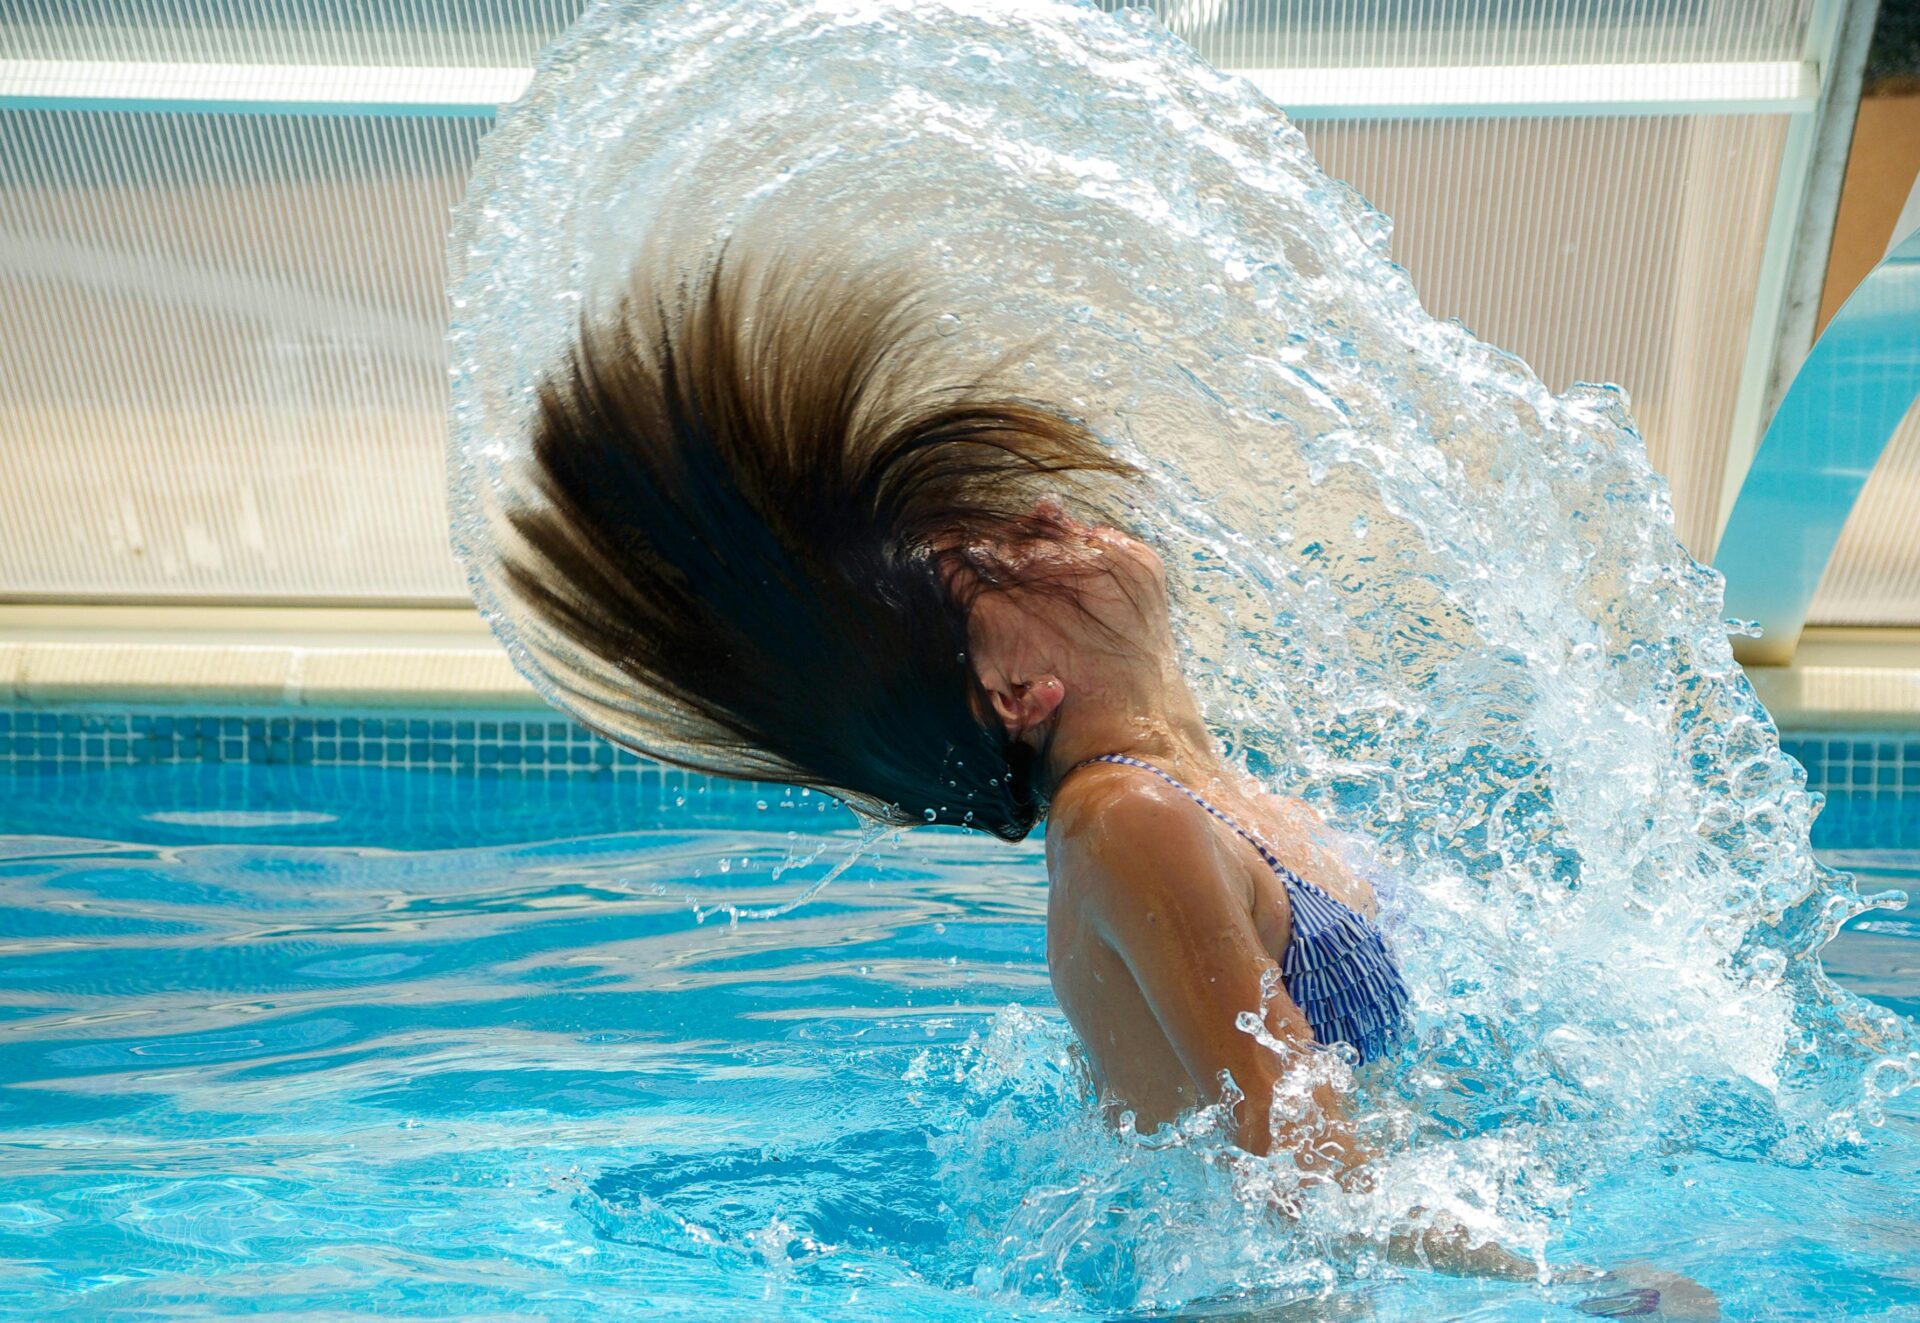 Related Posts: Styling Your Hair After a Swim: Tips & Tricks />